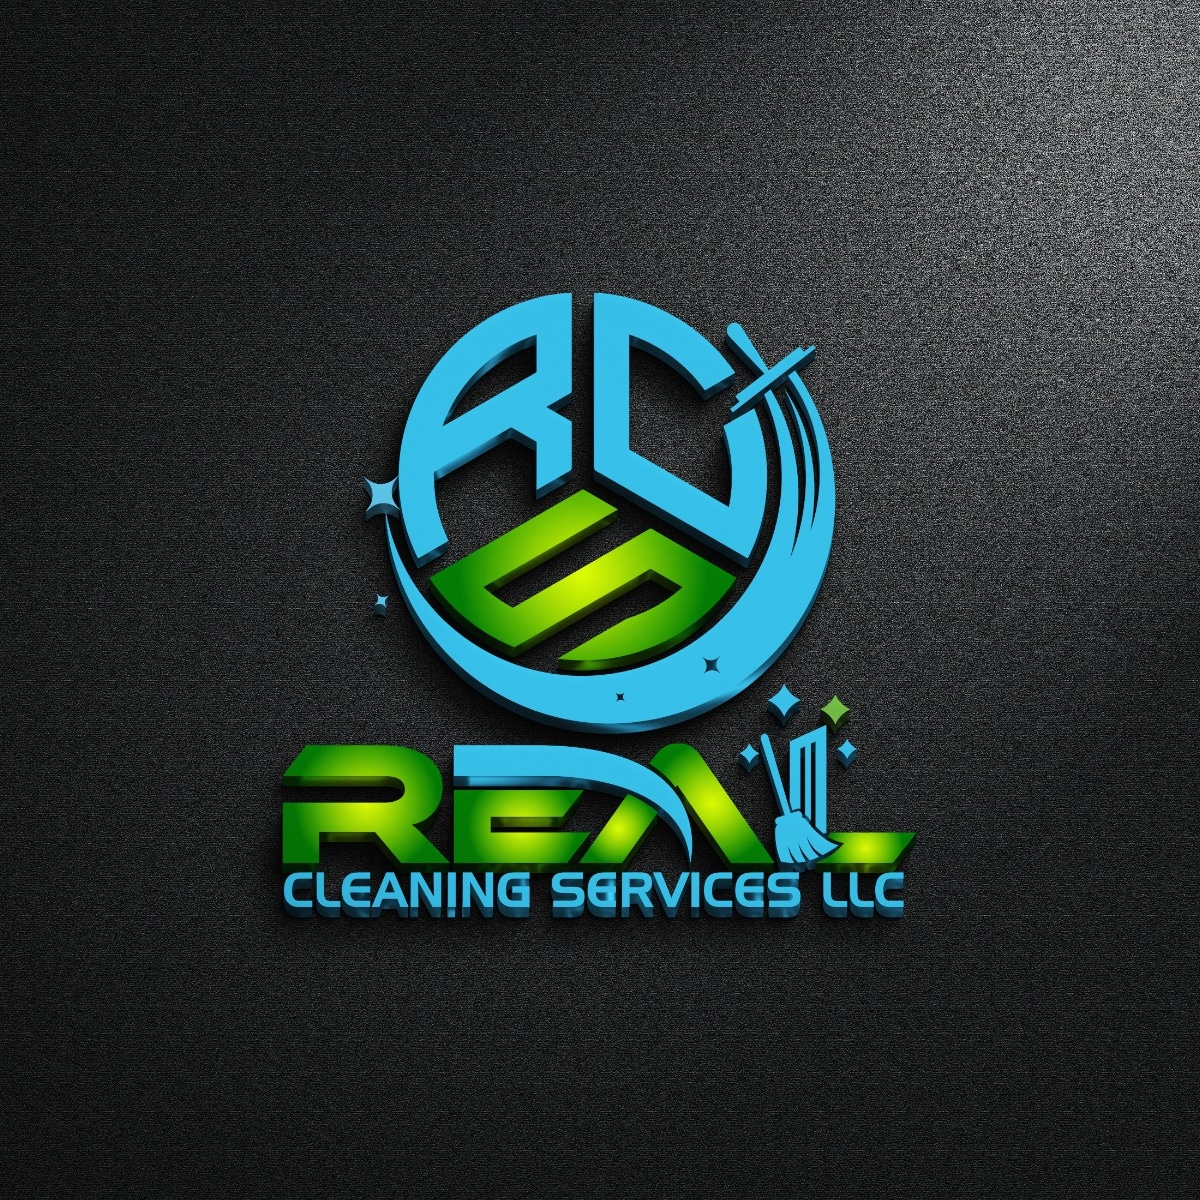 Real Cleaning Services LLC